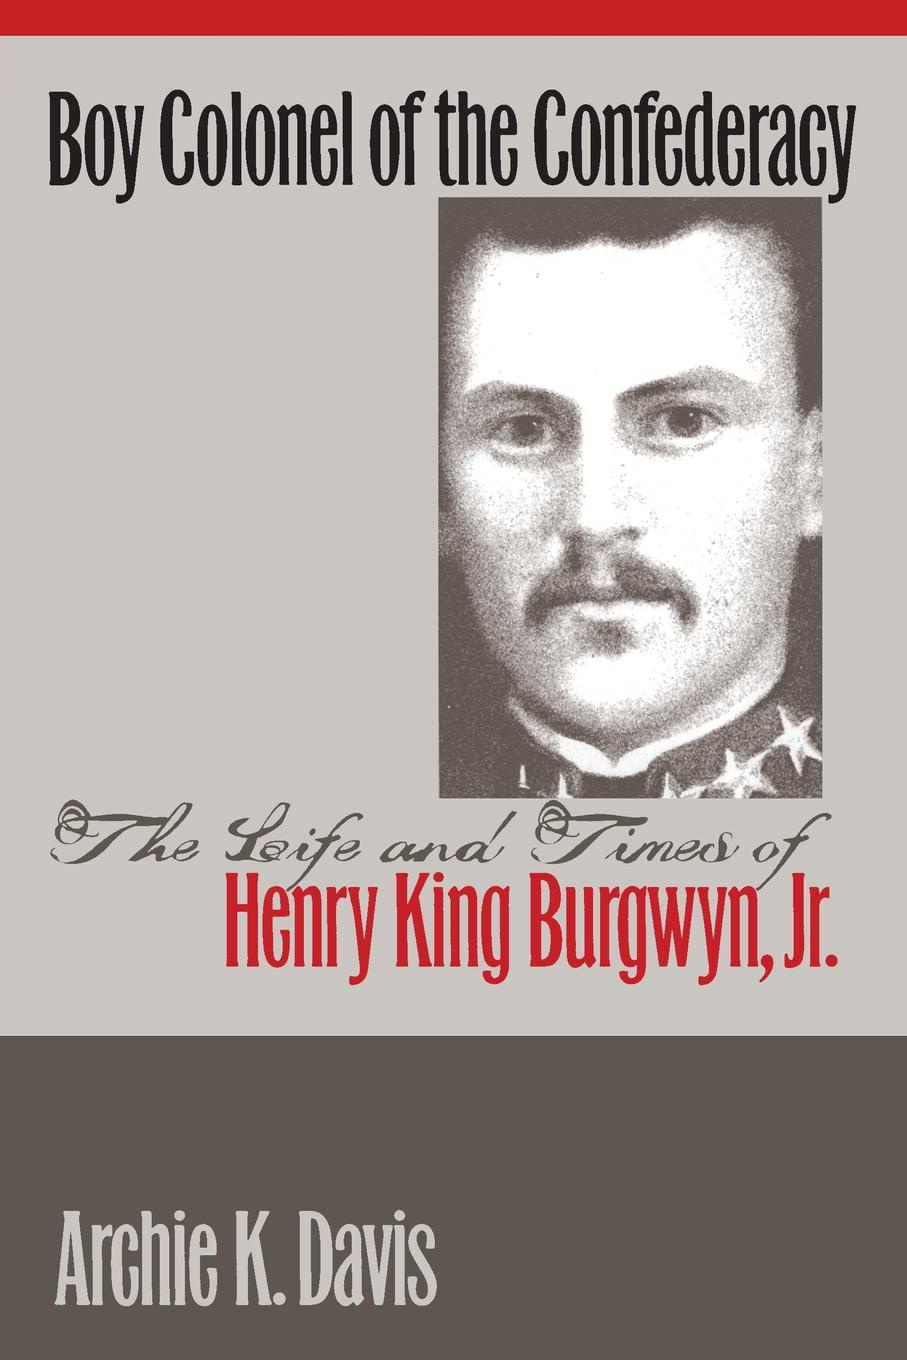 Boy Colonel of the Confederacy. The Life and Times of Henry King Burgwyn, Jr.